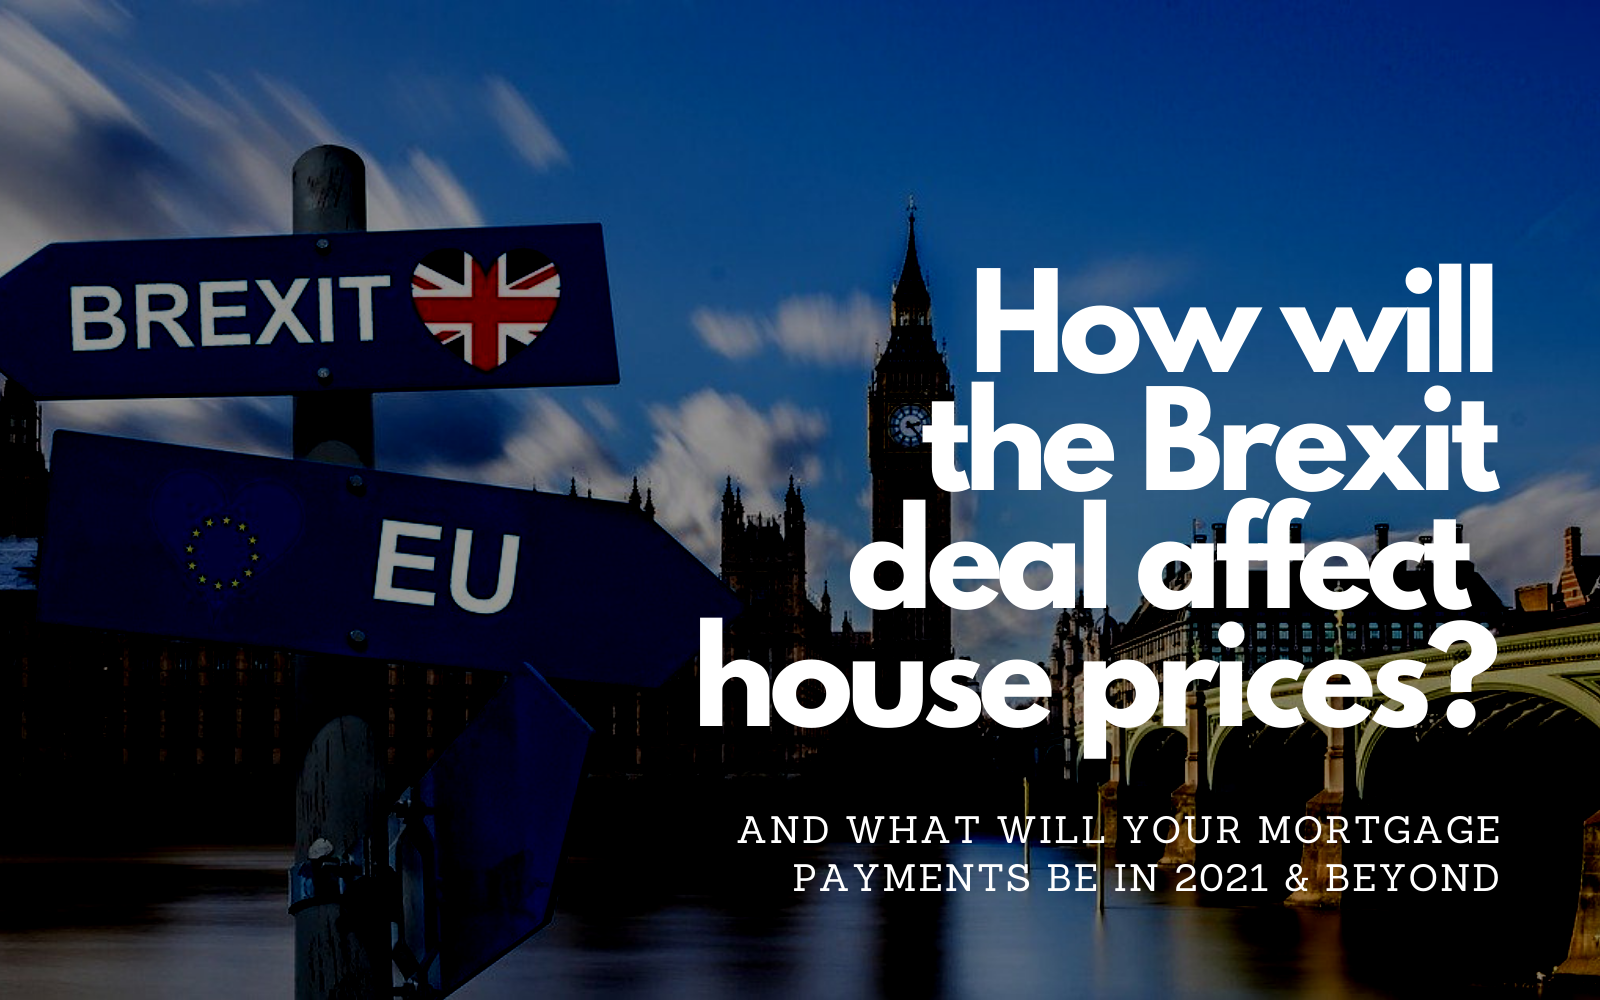 How will the Brexit deal affect West Hampstead house prices & your mortgage payments?